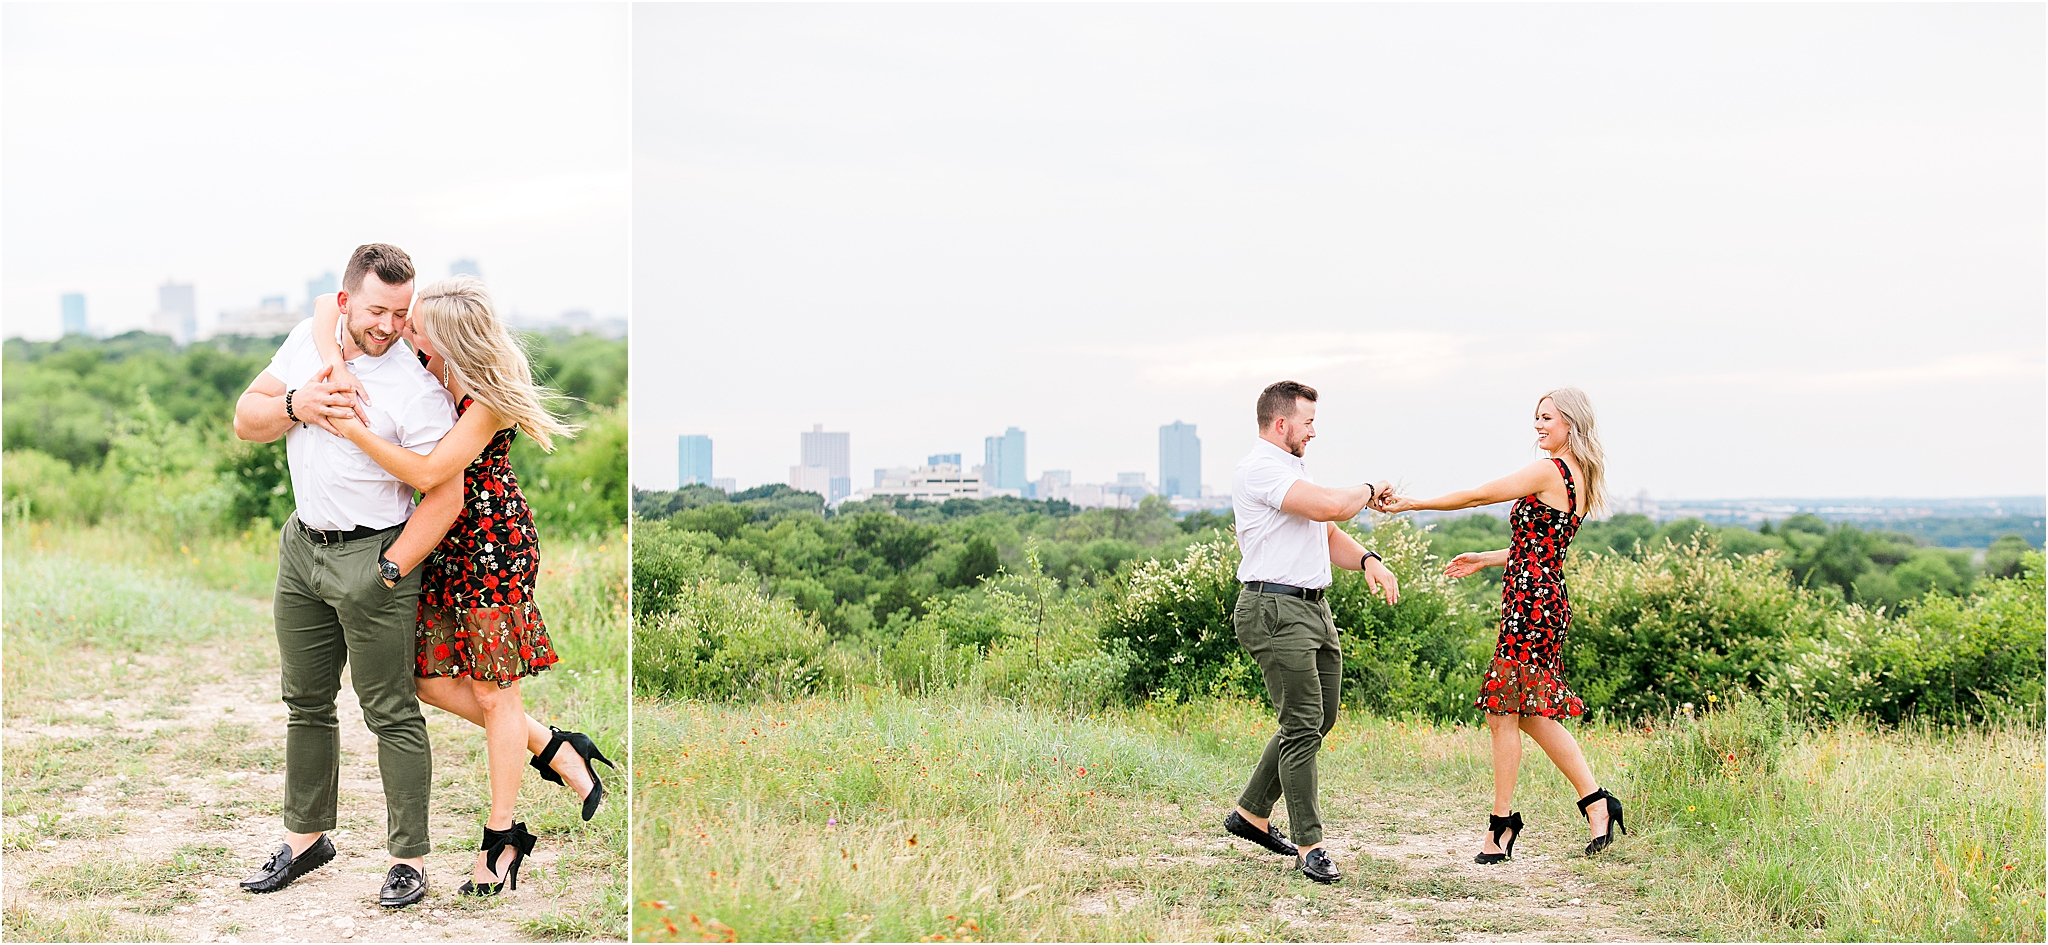 A couple dances at Tandy Hills nature preserve with the fort worth skyline in the background during their engagement session 